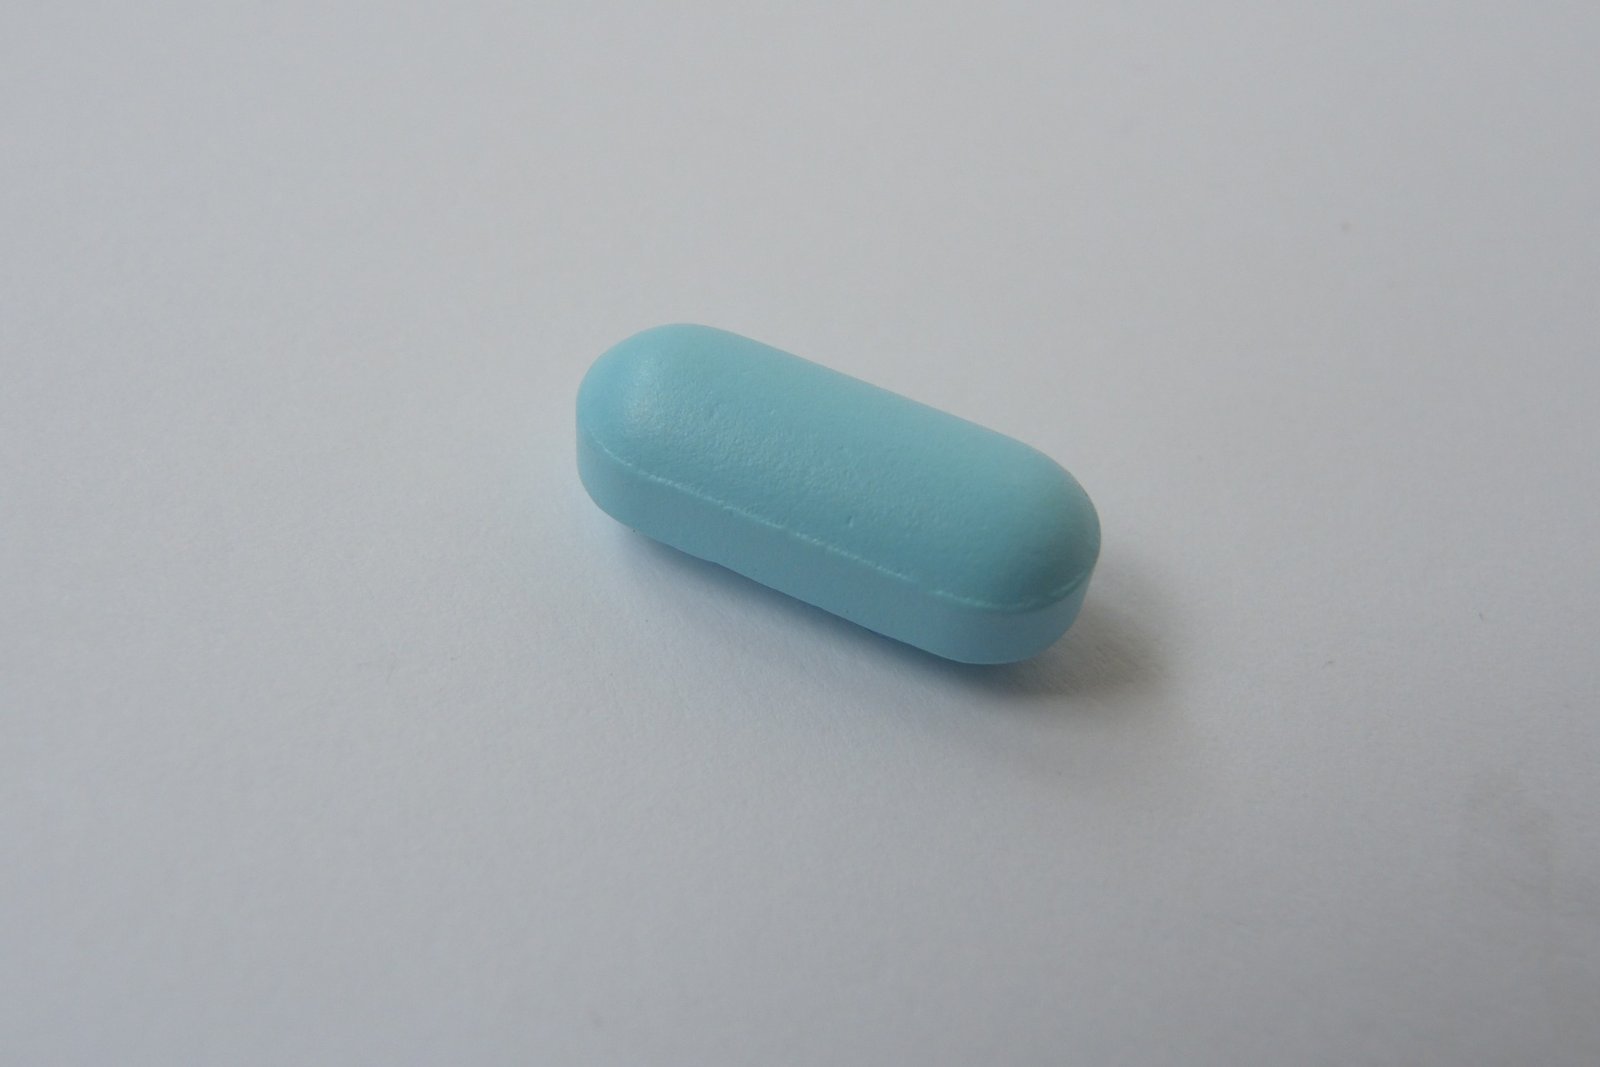 Polycap: A Little Wonder Pill to reduce the risk of heart disease